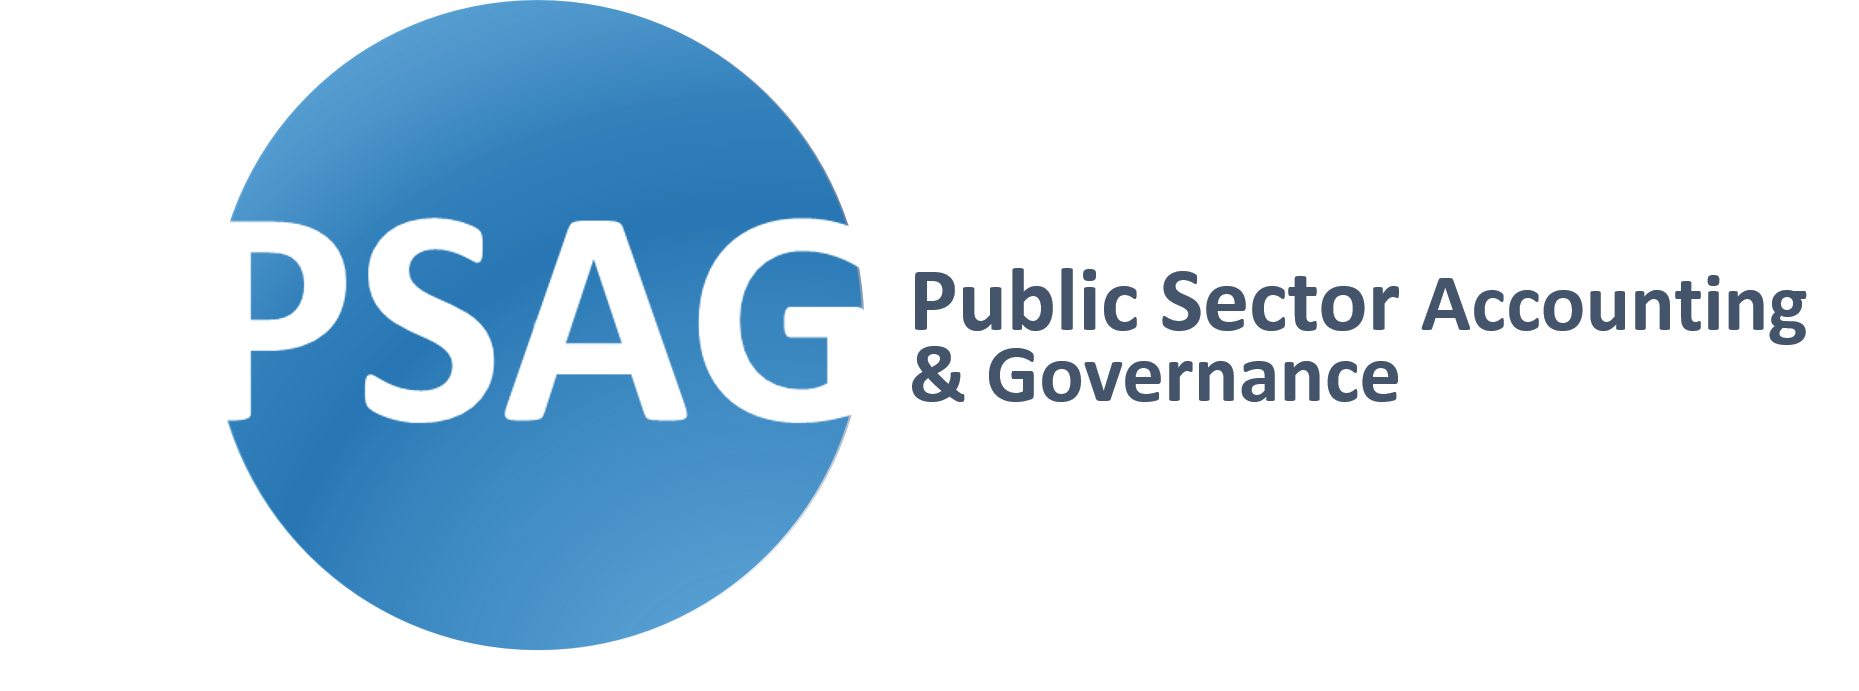 Public Sector Accounting & Governance in Brazil